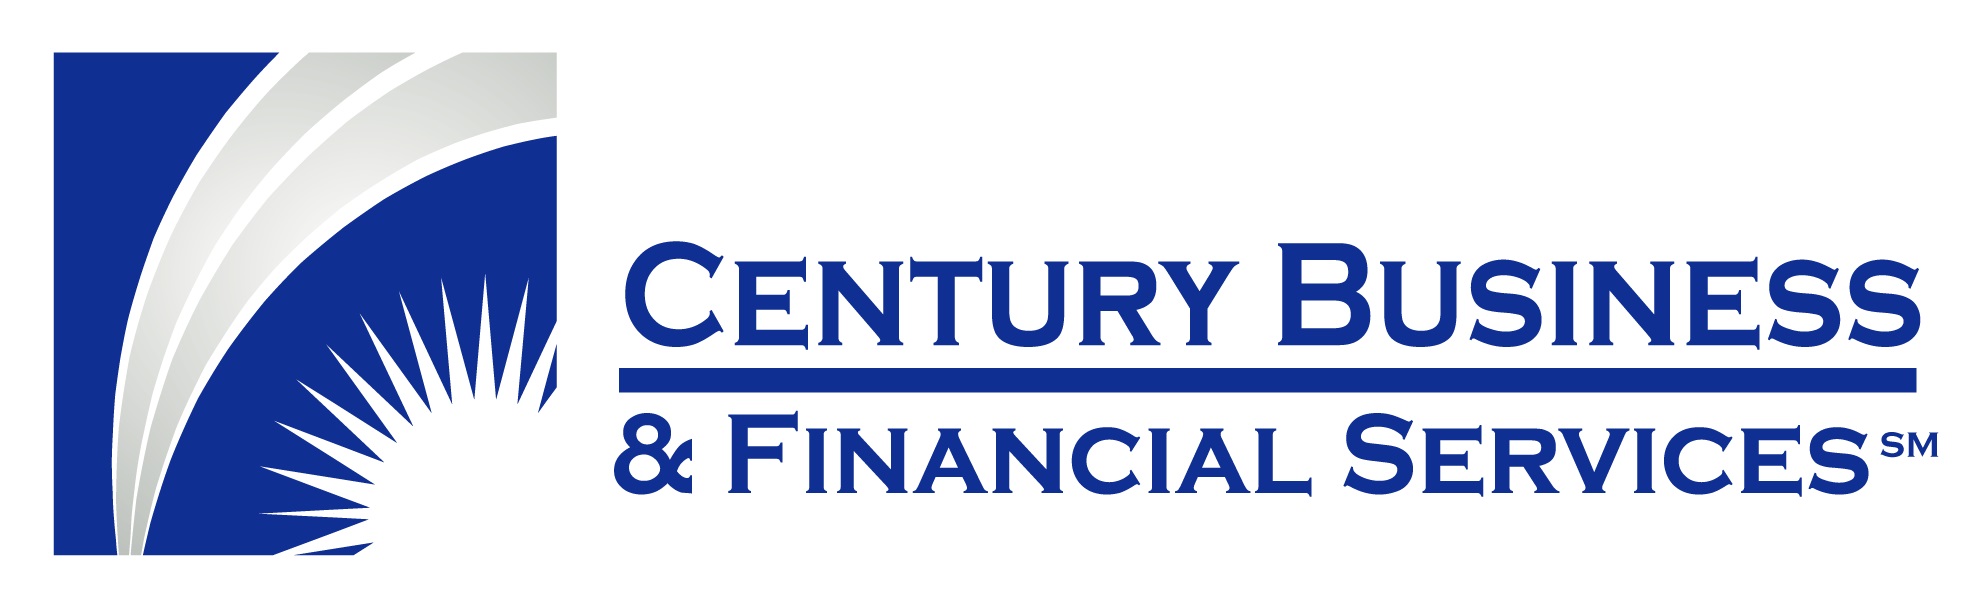 Century Business & Financial Services